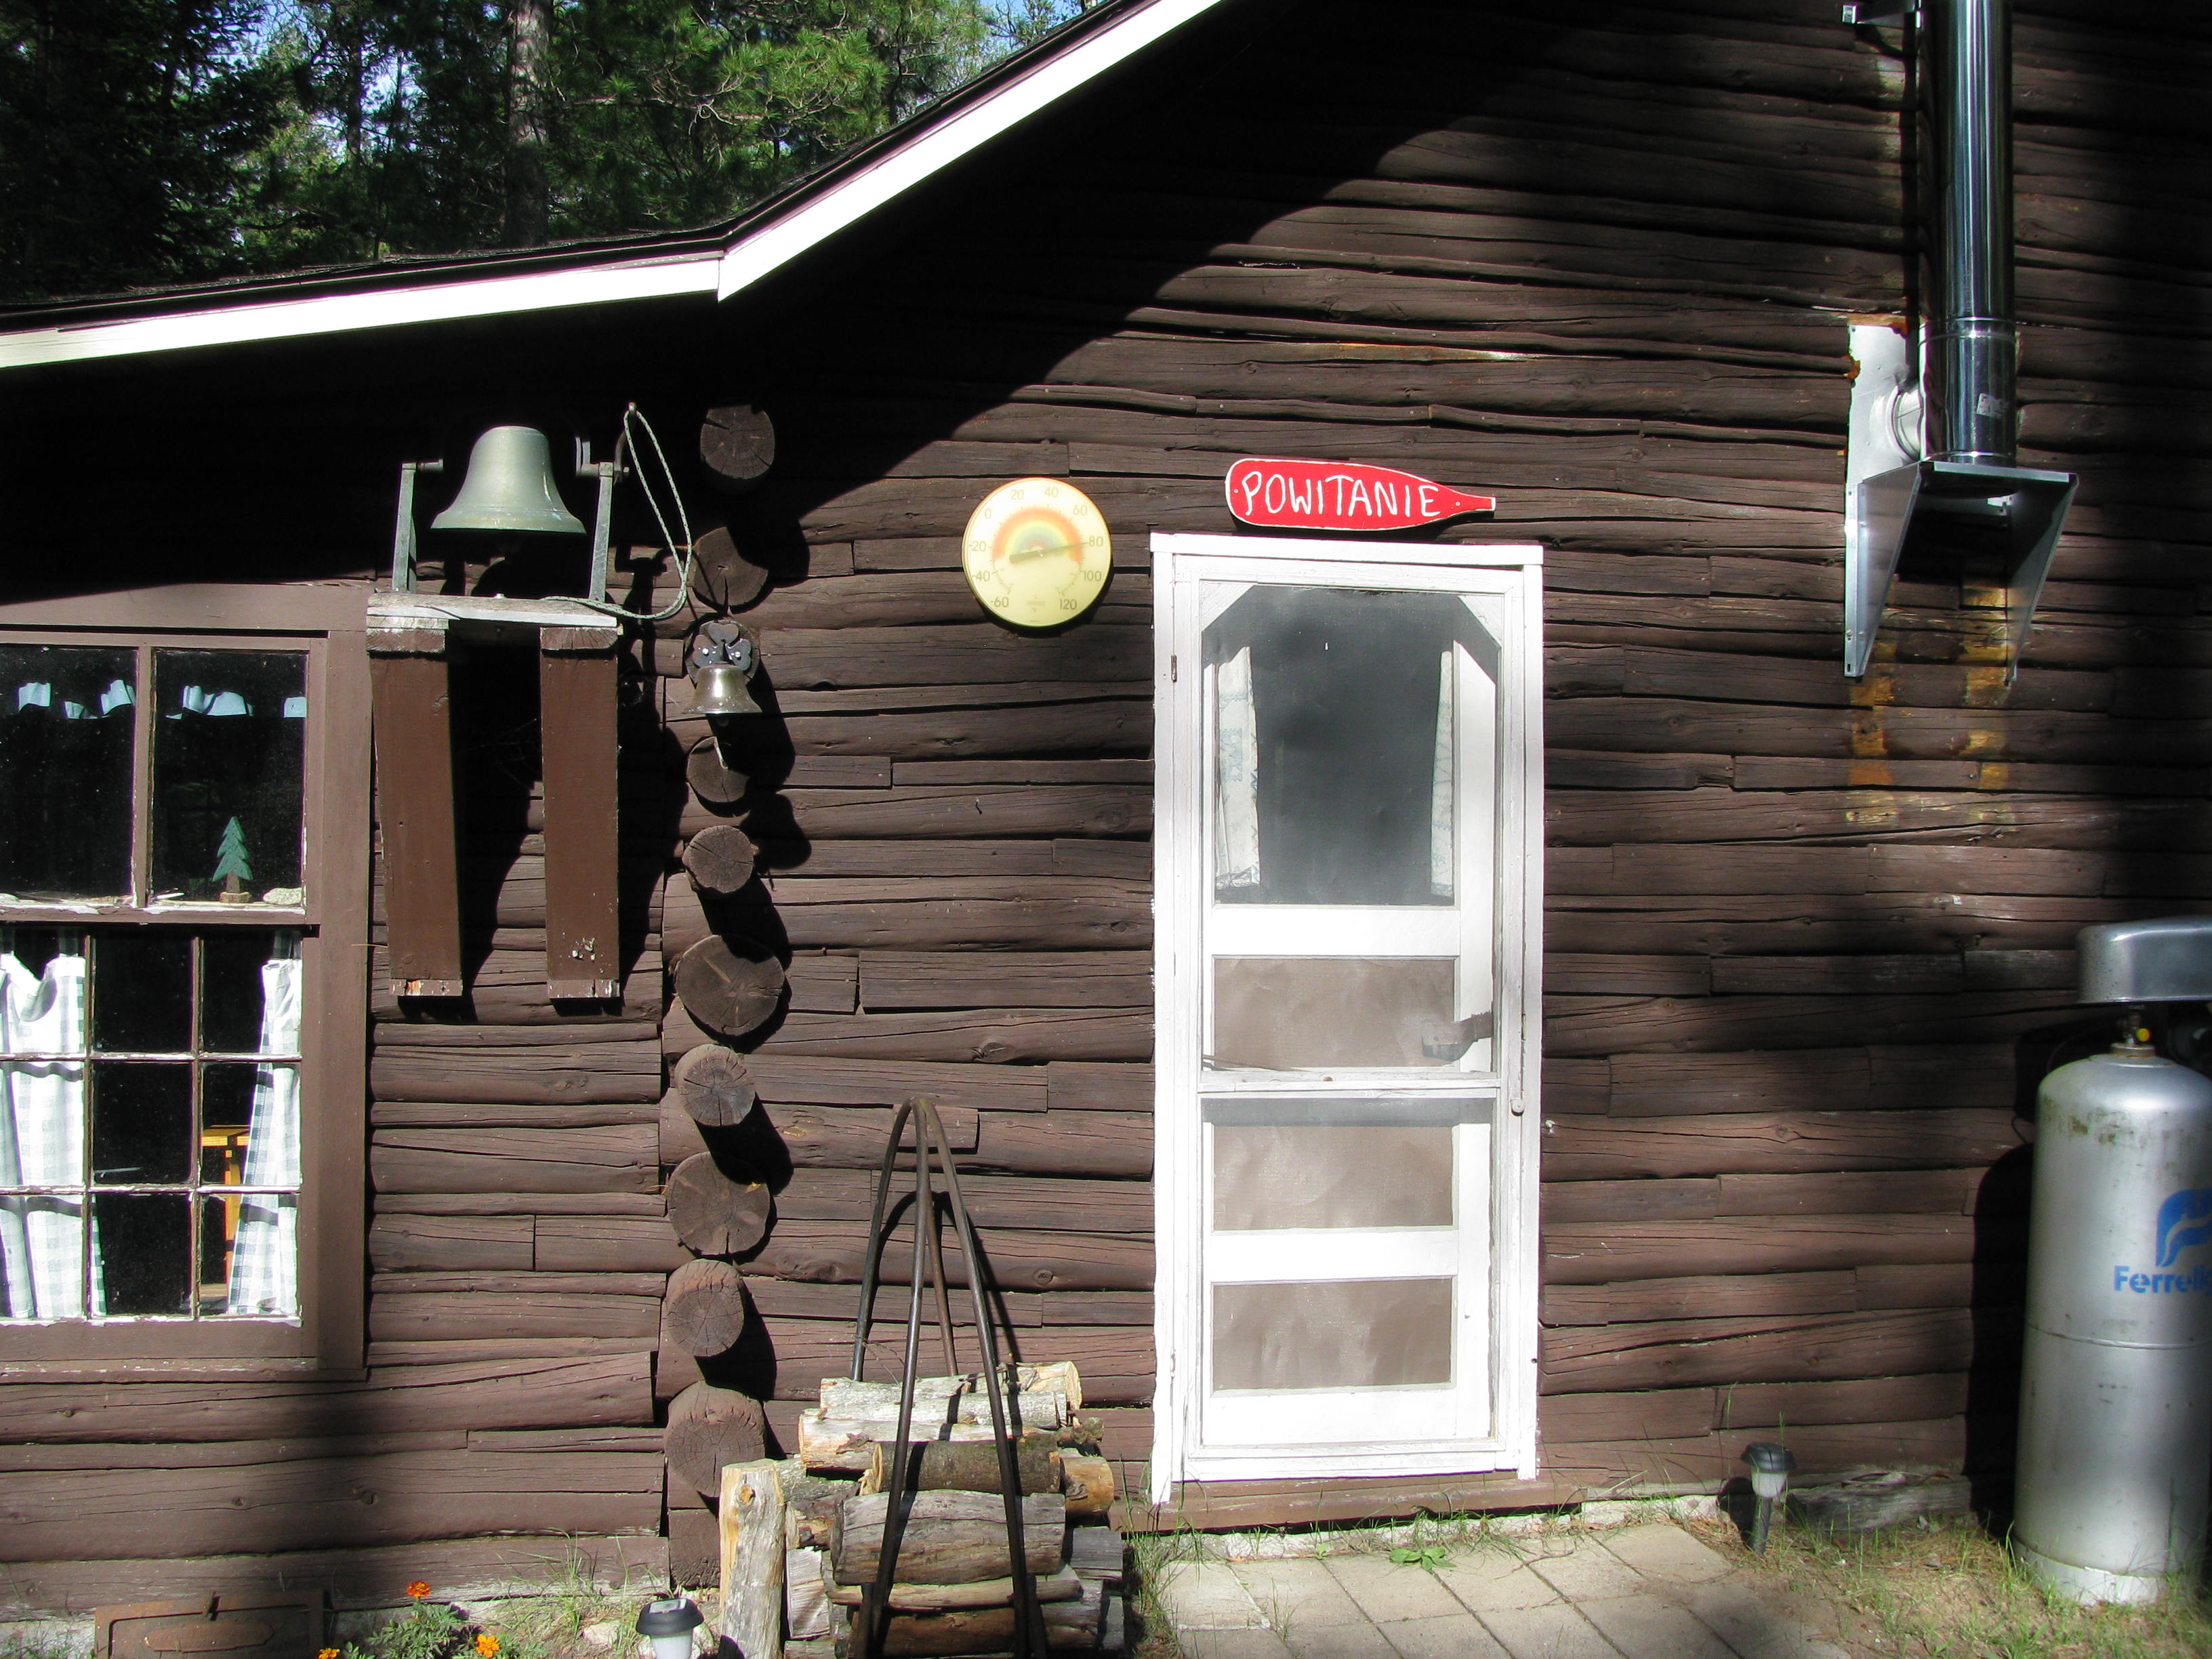 west side of the cabin